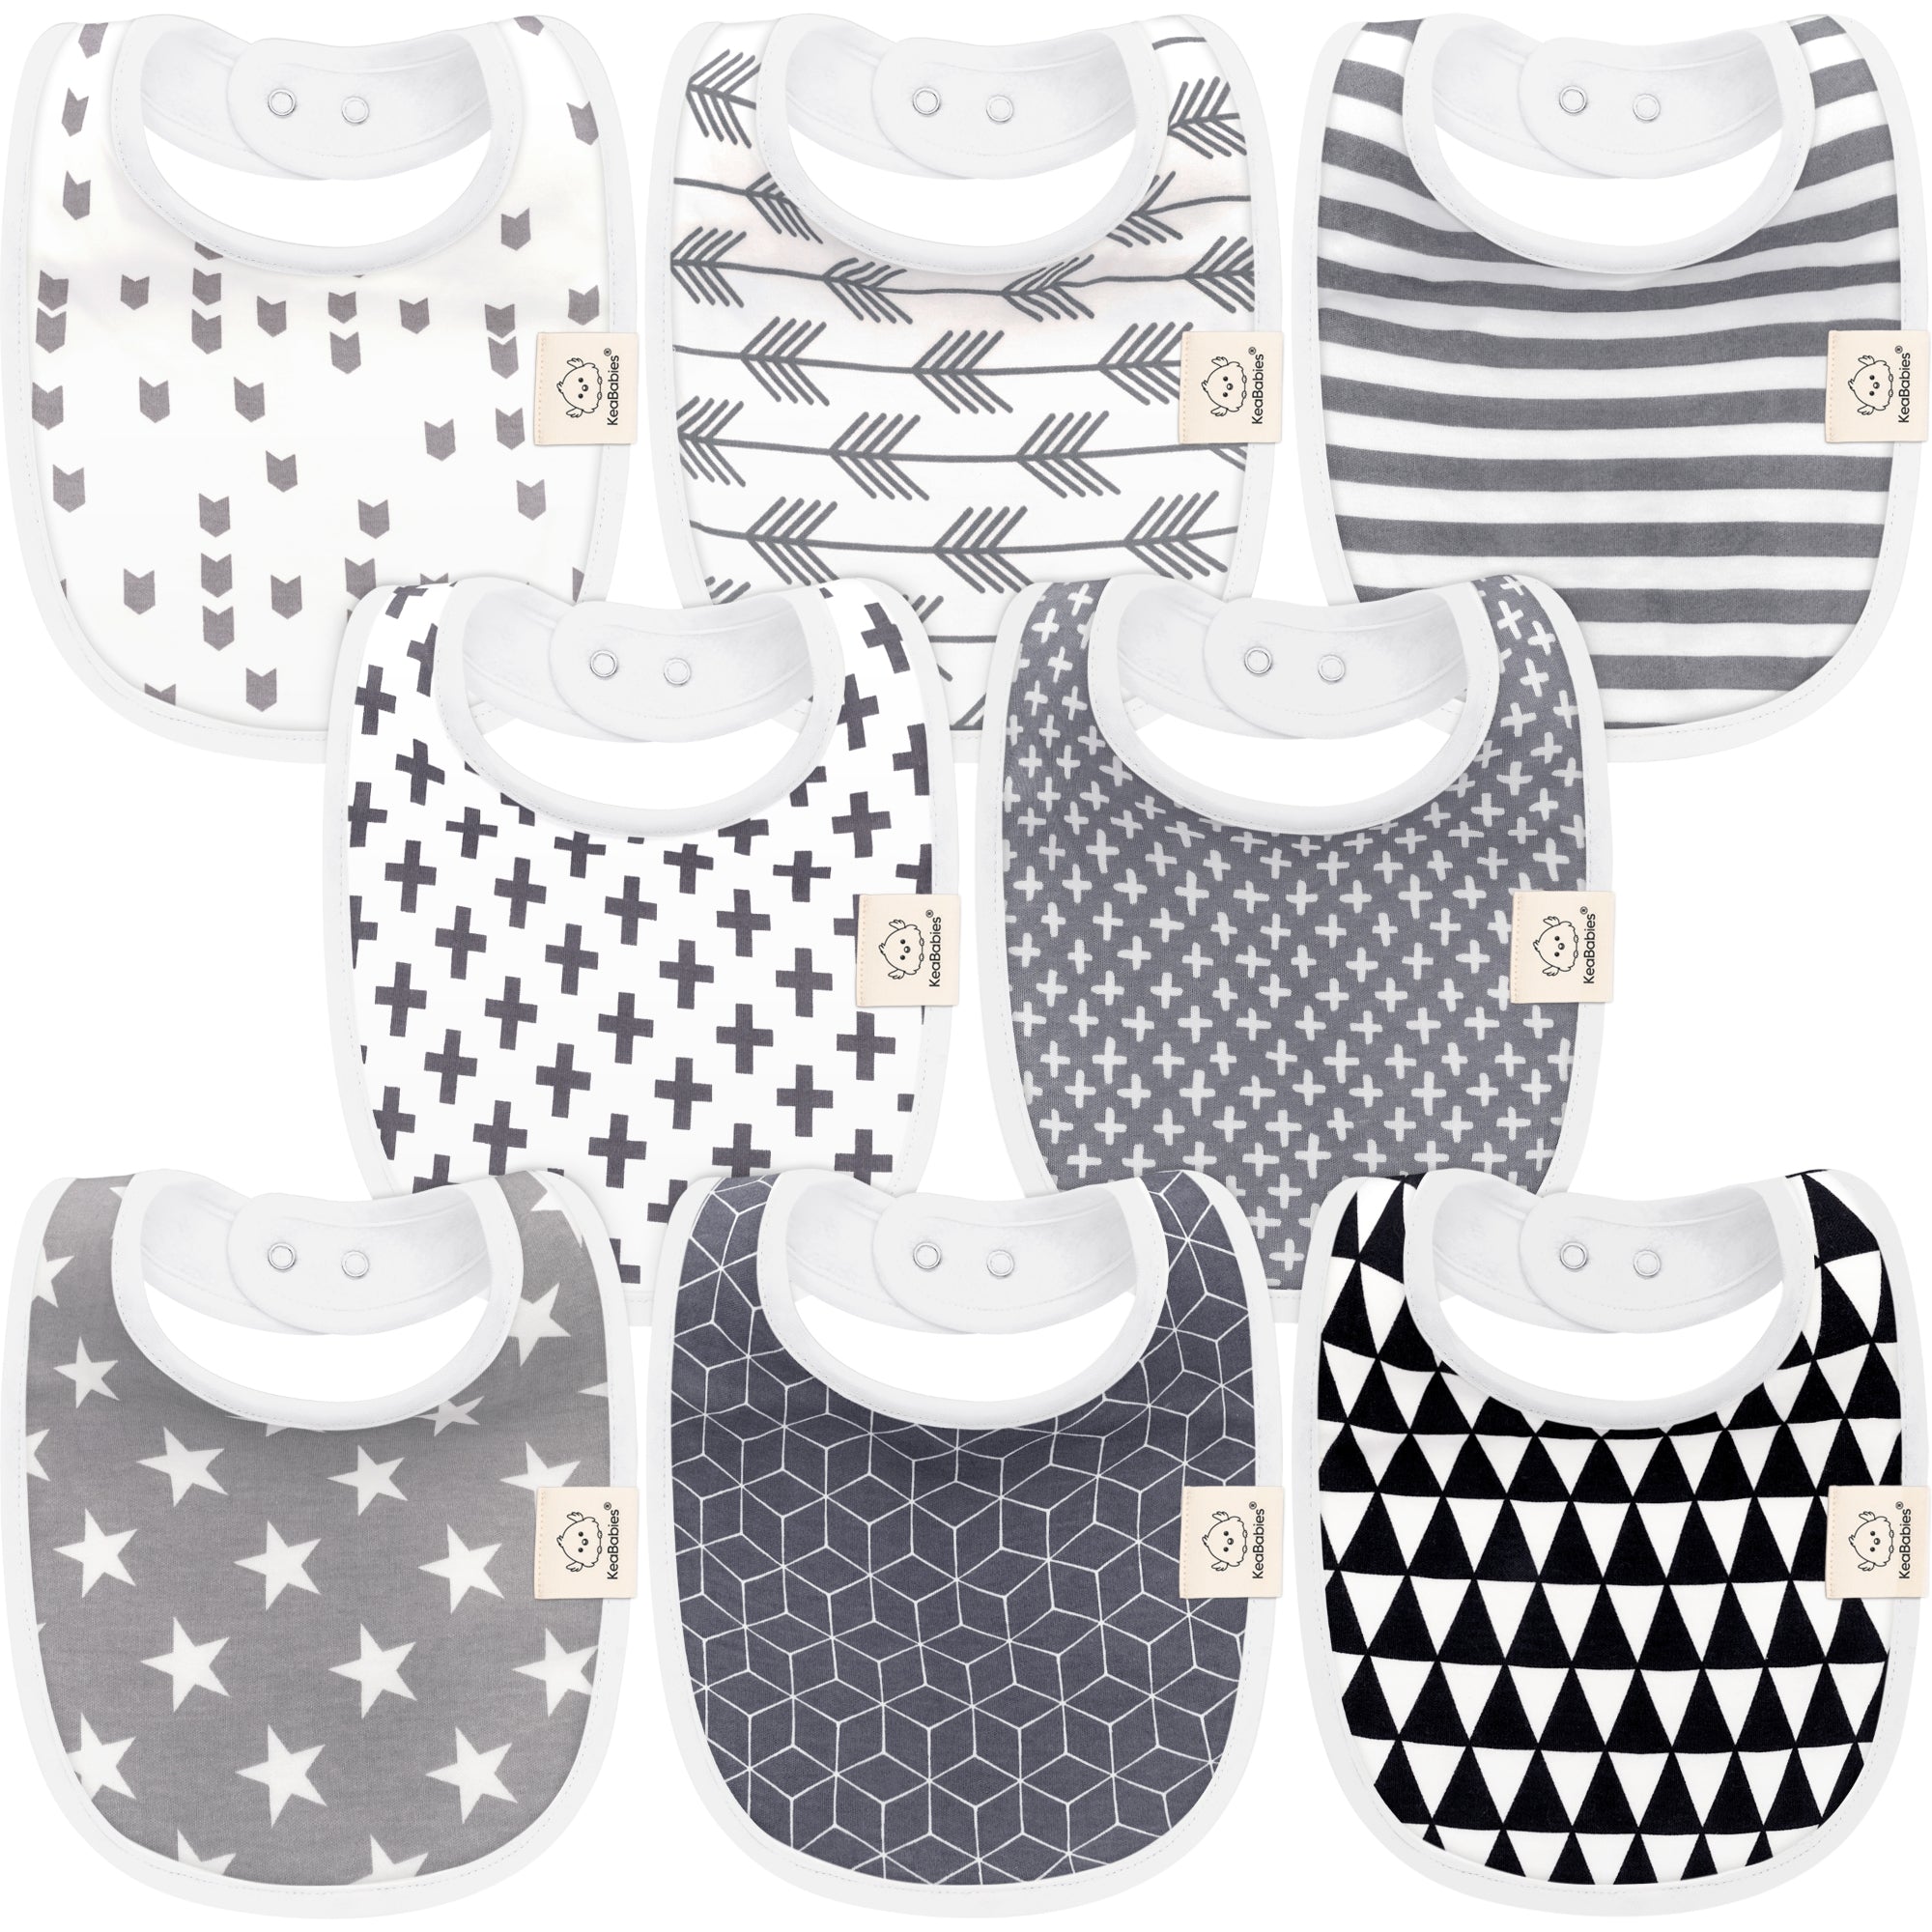 Toppy Toddler Soft Organic Cotton Infant Baby Drool Bibs with Snap